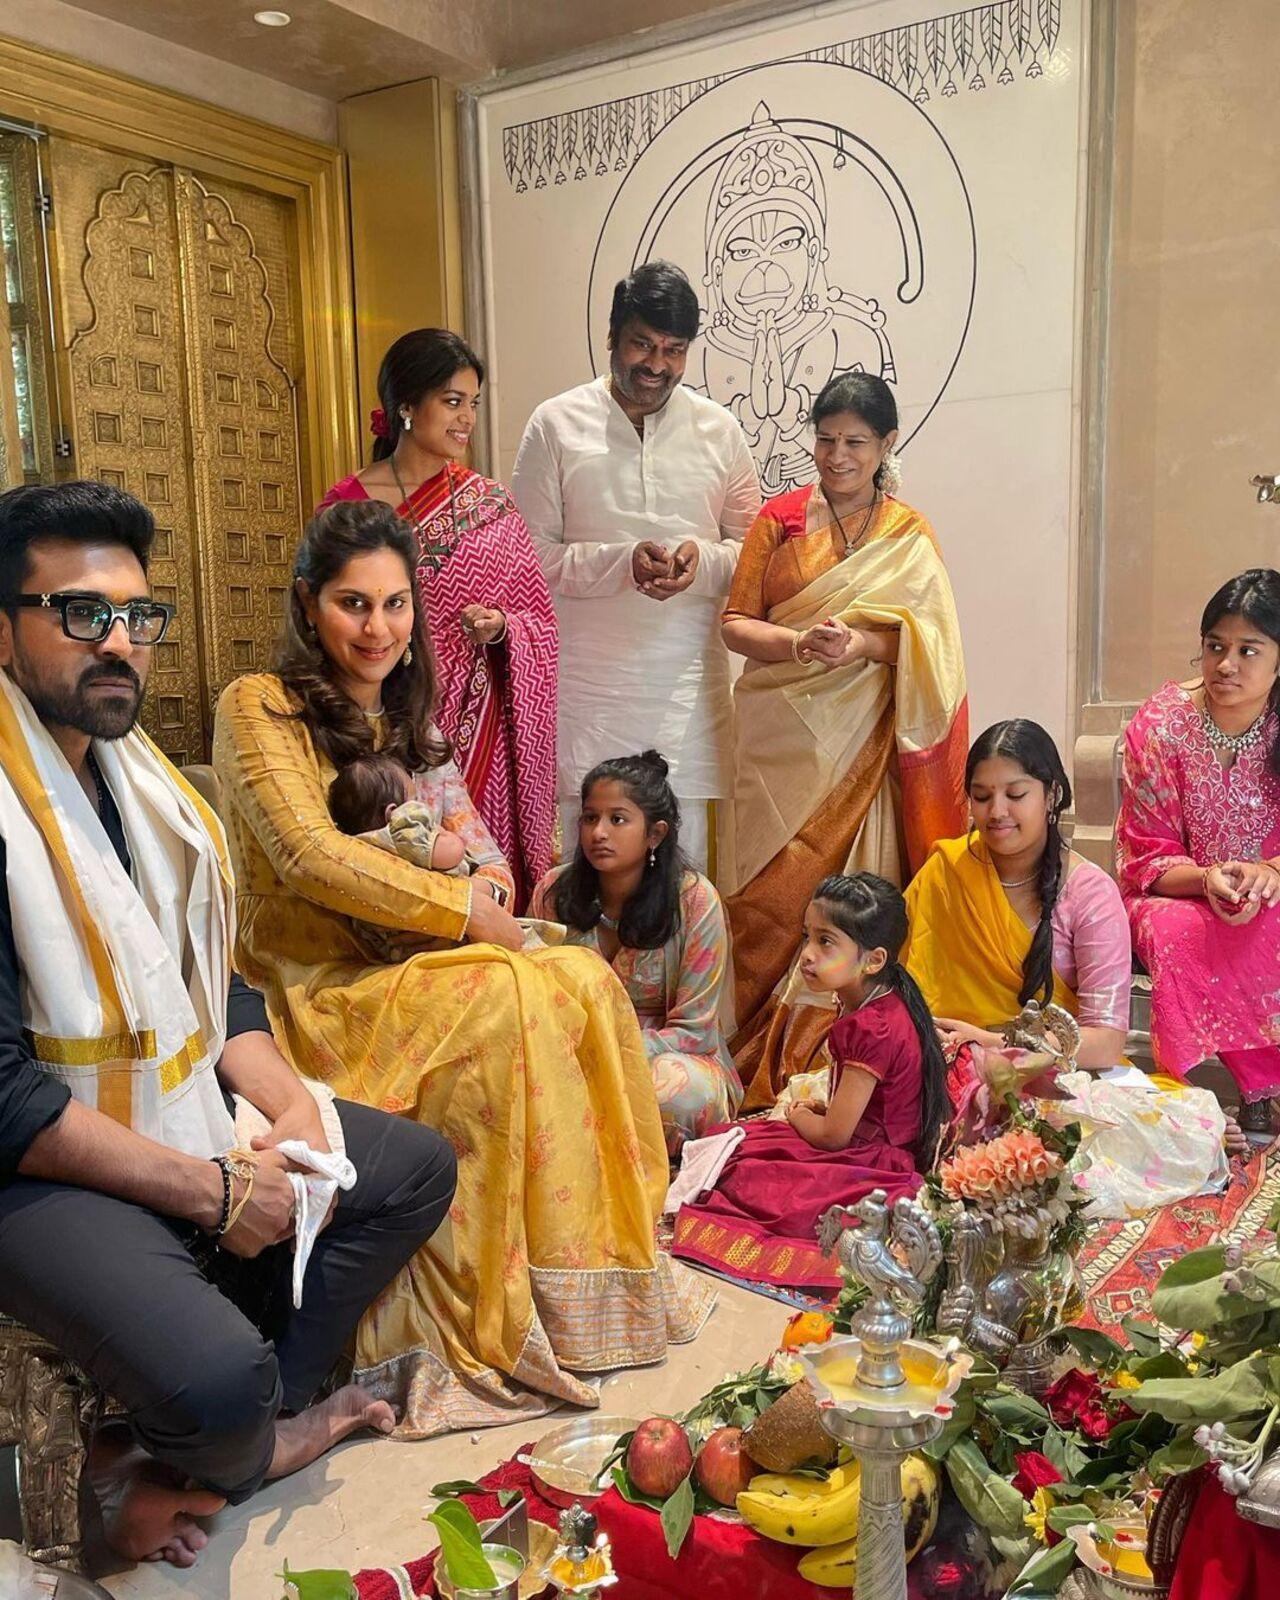 Ram Charan also welcomed the lord to their house